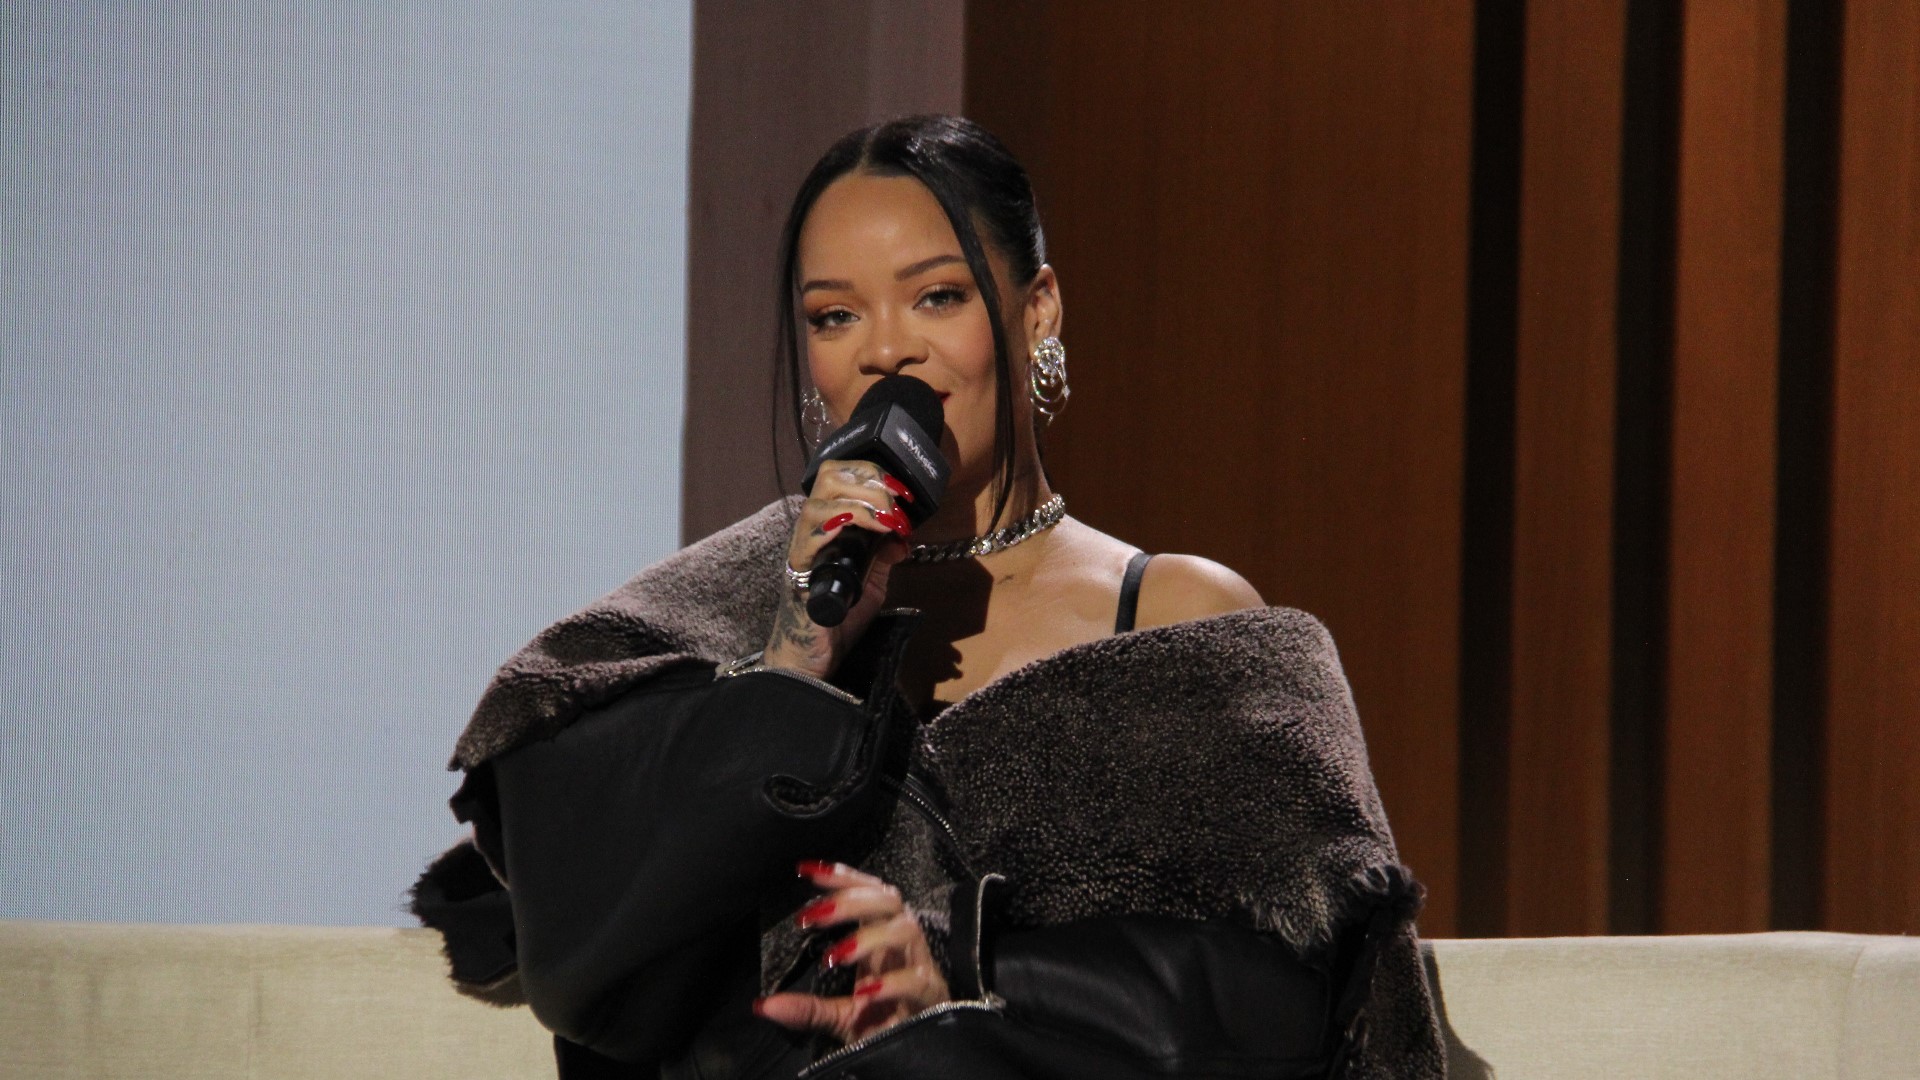 Rihanna sat down with Apple Music reporter and host, Nadeska Alexis to discuss her journey with music, motherhood and now, the Super Bowl Halftime show.